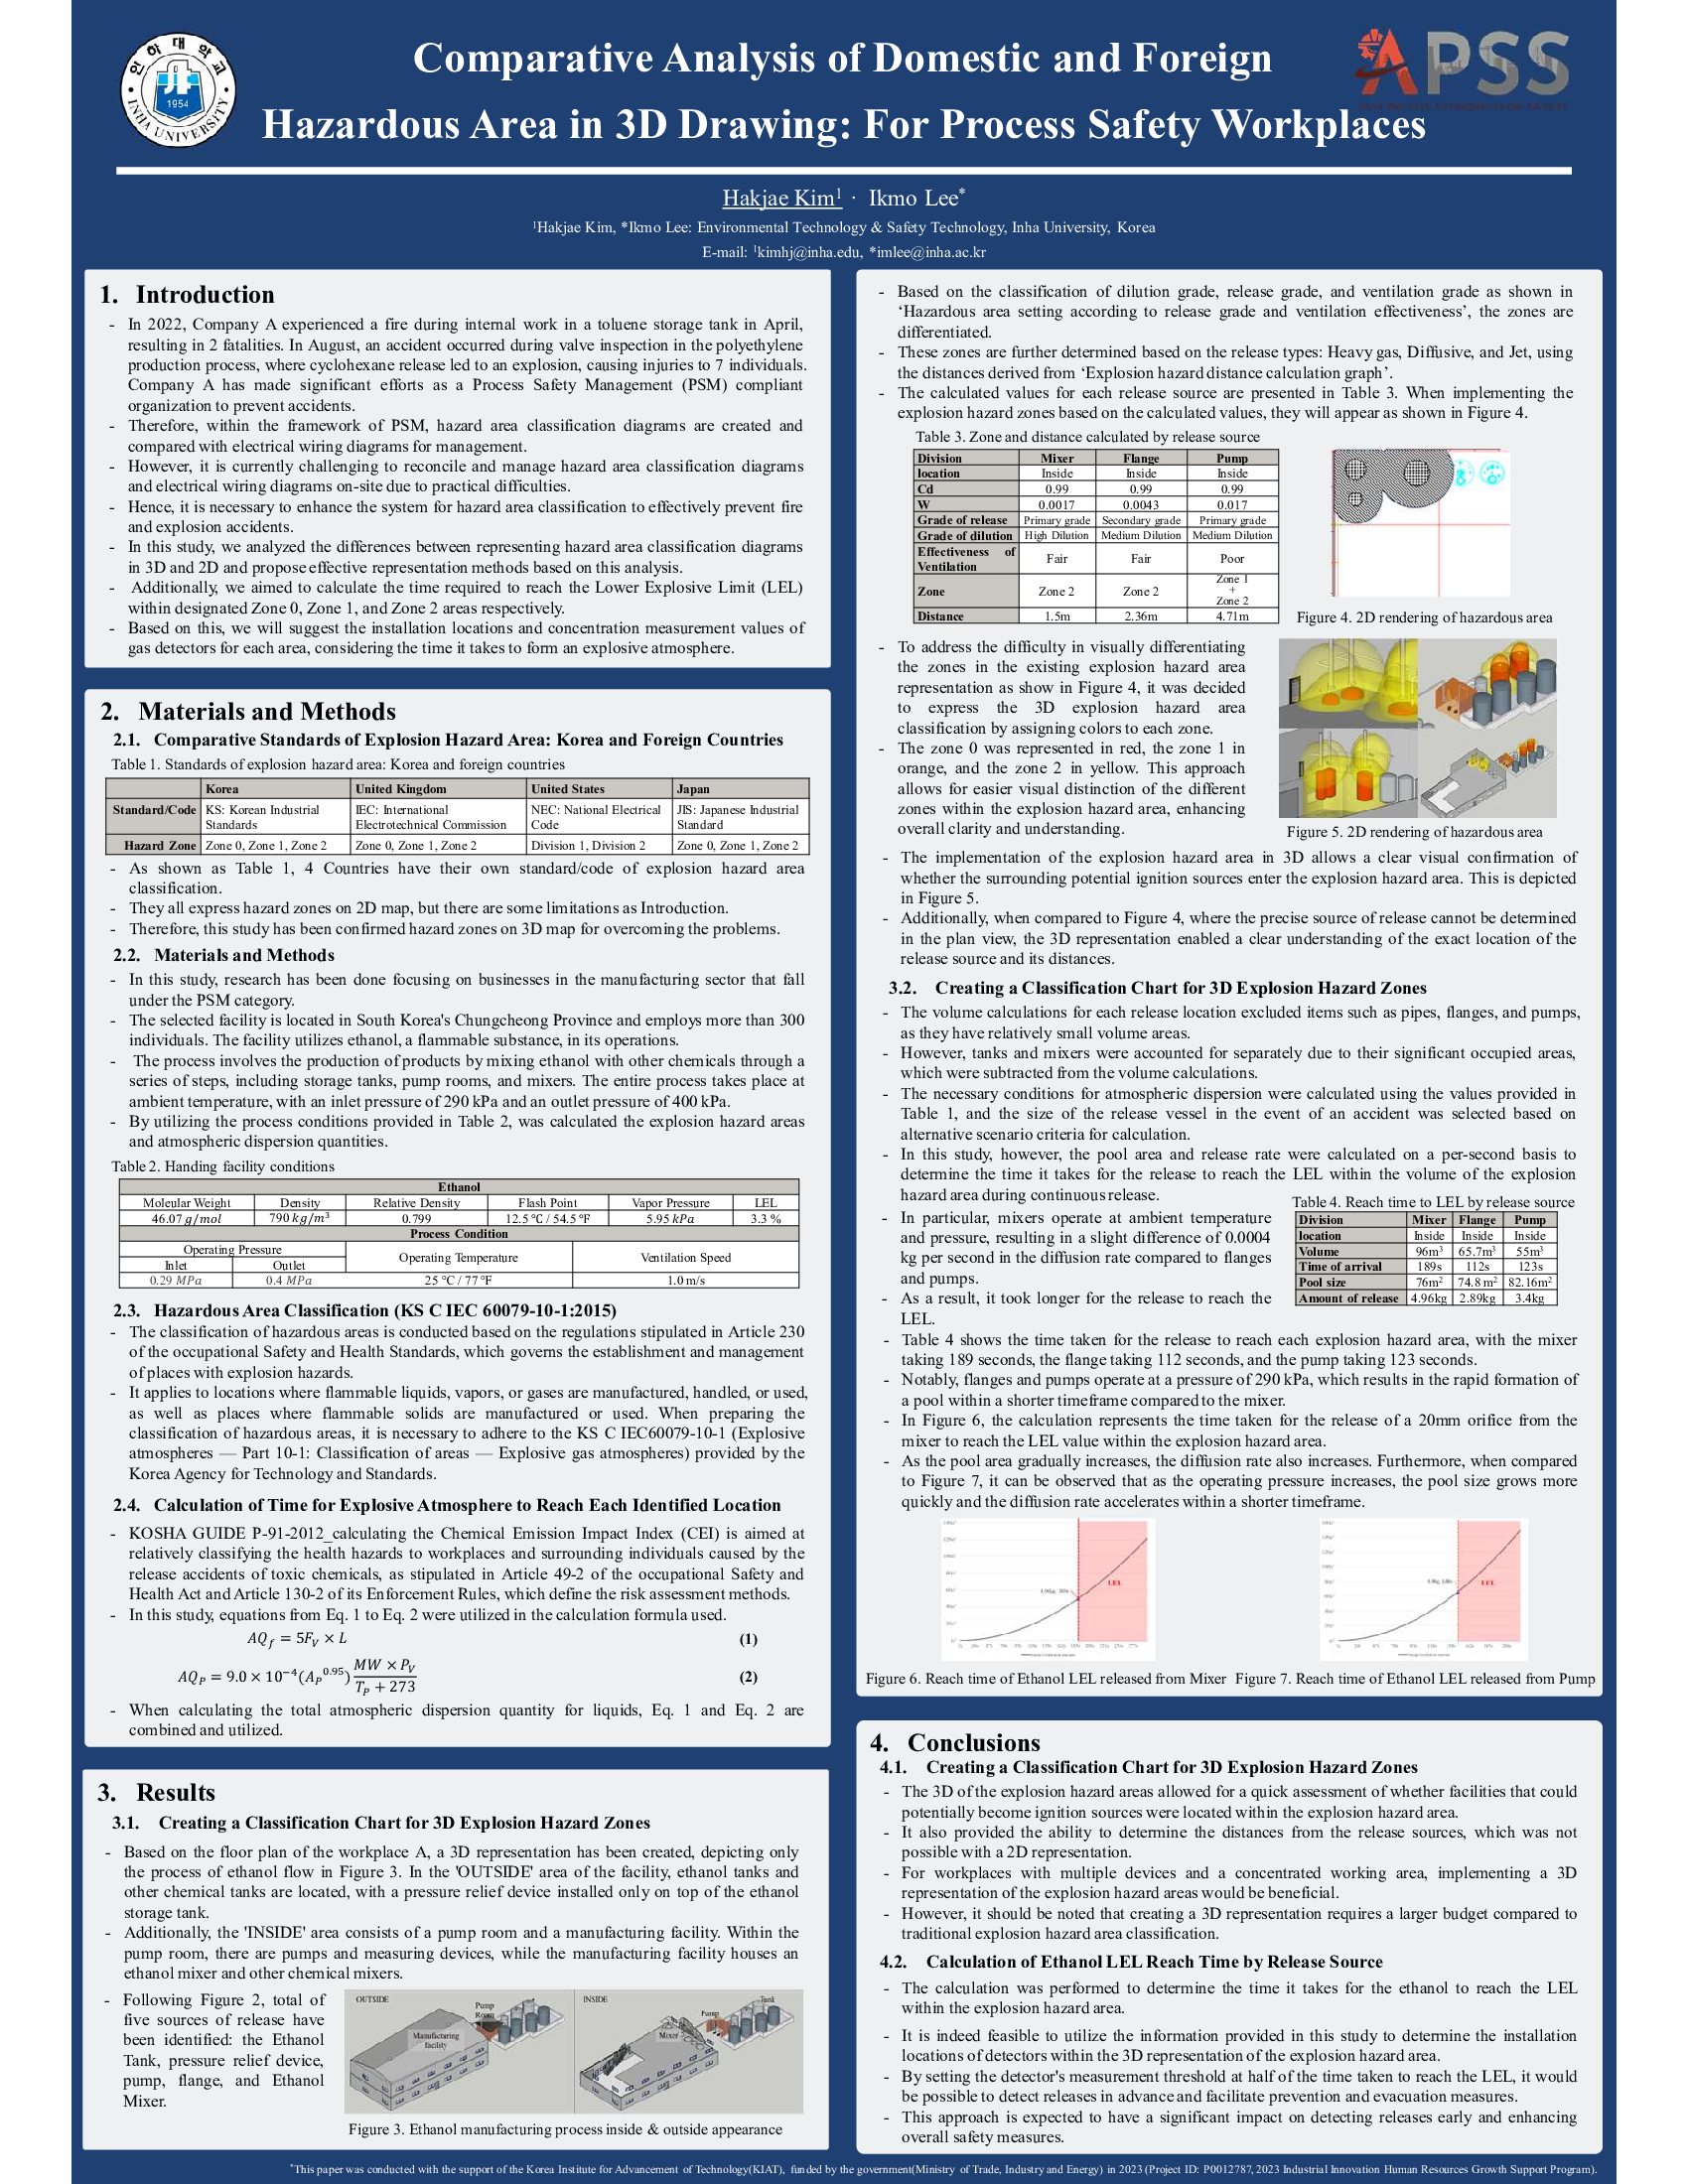 Comparative Analysis of Domestic and Foreign Hazardous Area in 3D Drawing: For Process Safety Workplaces 첨부 이미지